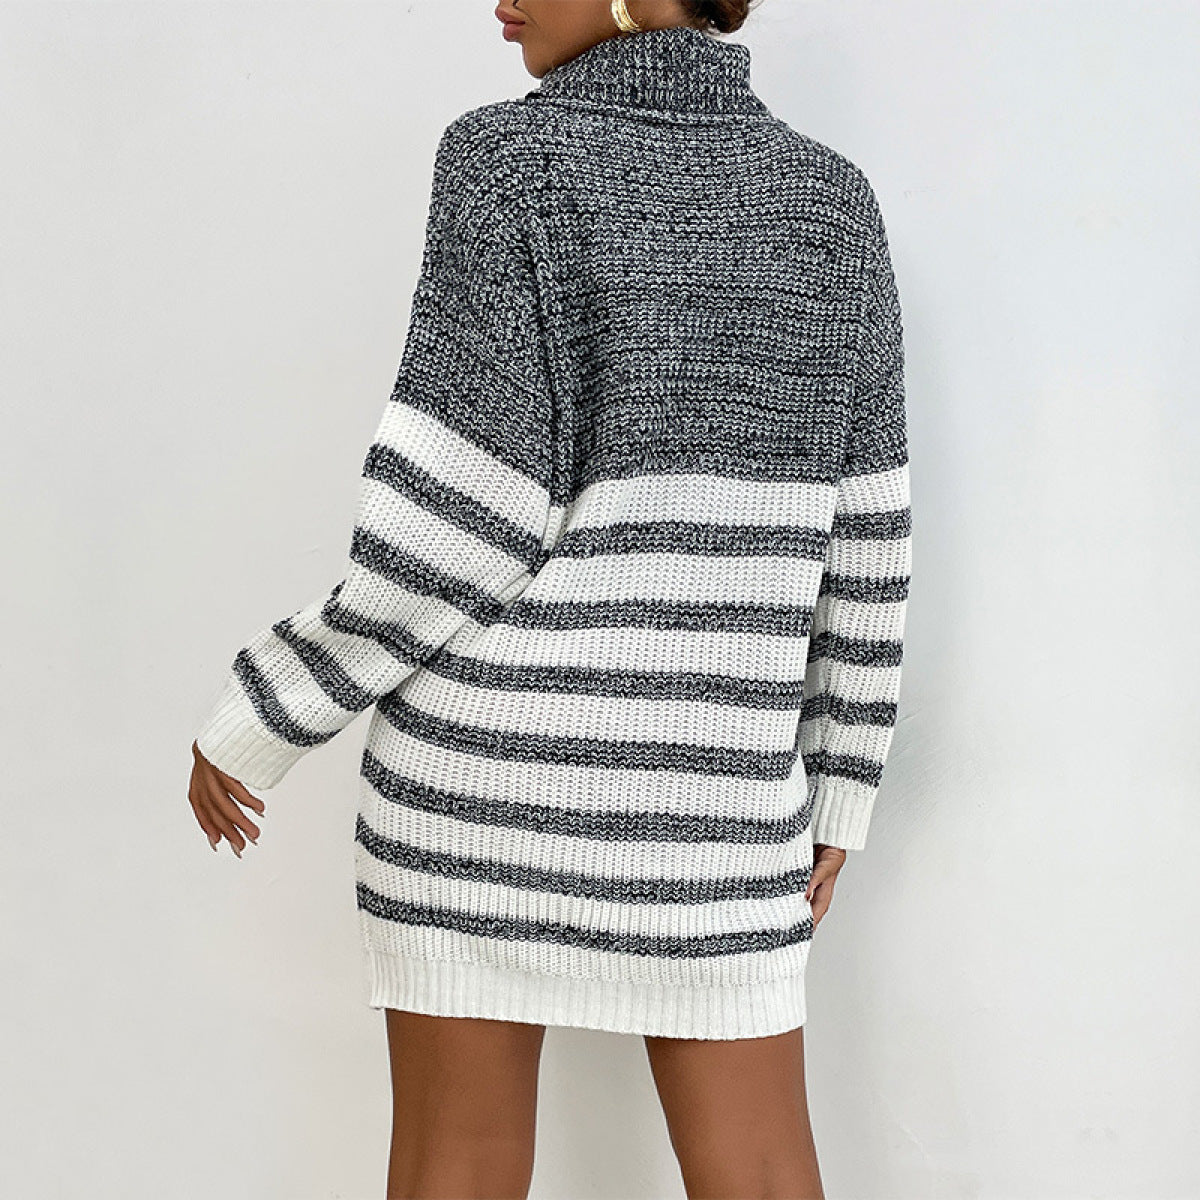 Turtleneck Long Sleeve Knitted Colorblock Sweater Dress